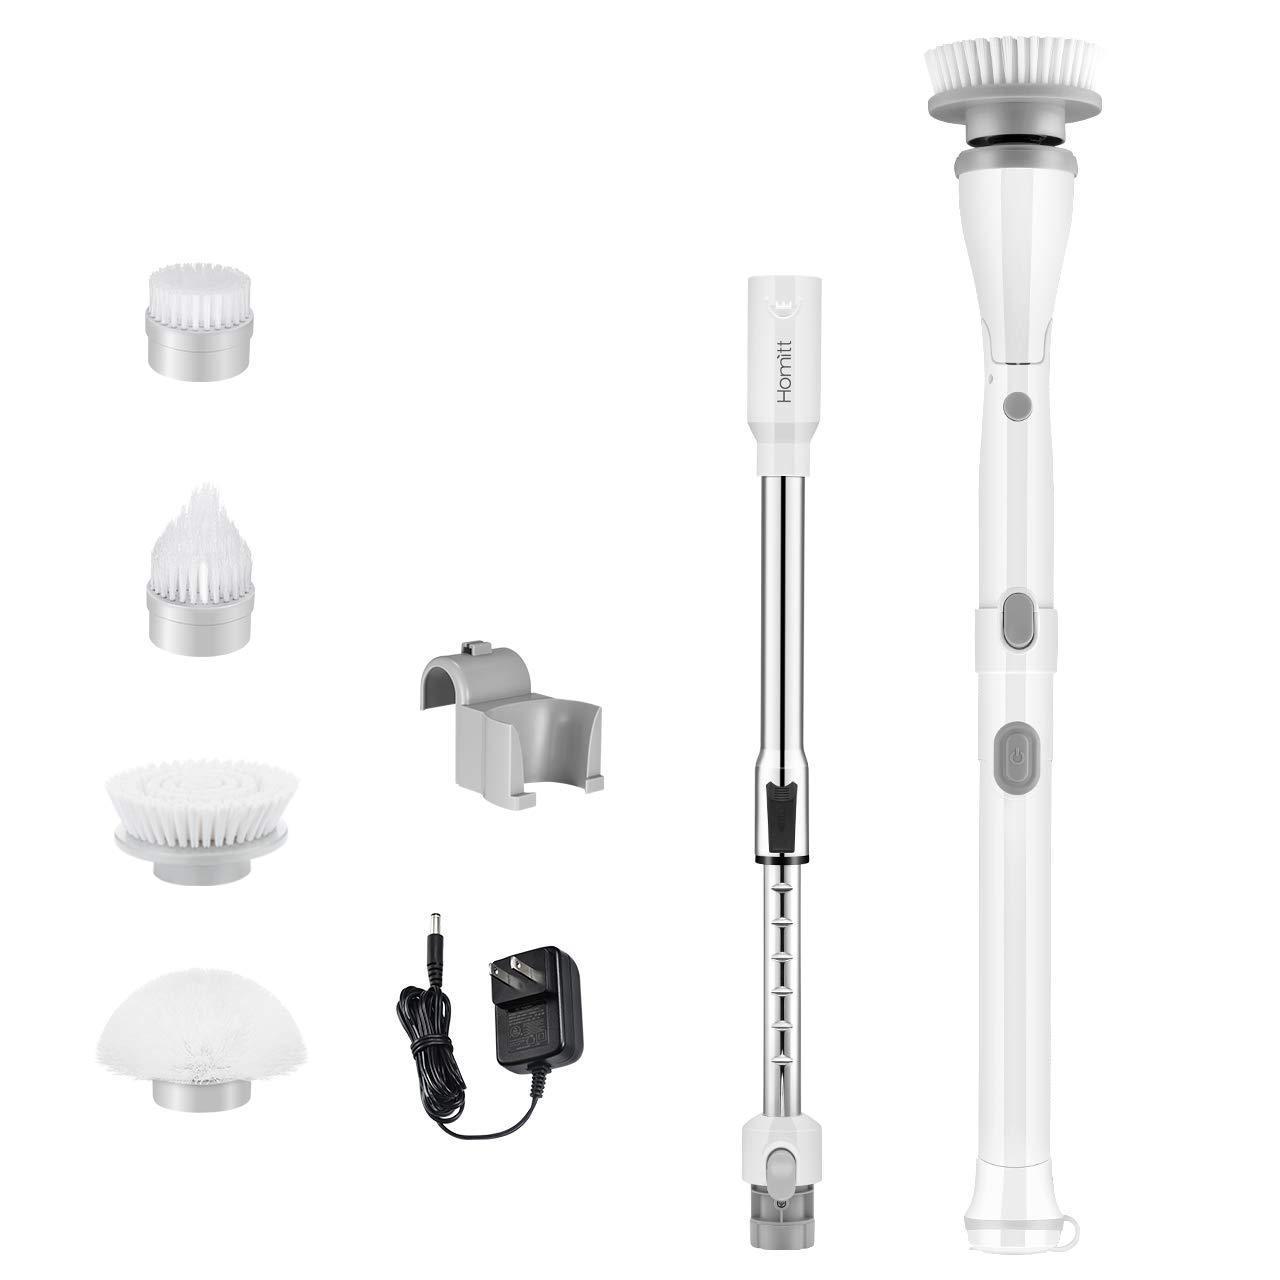 Electric Cleaning Brush, Rechargeable Electric Spin Scrubber Power  Scrubber, 360 Degree Handheld Cleaning Brush with 4 Replaceable Scrubber  Brush Heads for Bathroom, Tub, Wall Tiles, Floor, Kitchen 